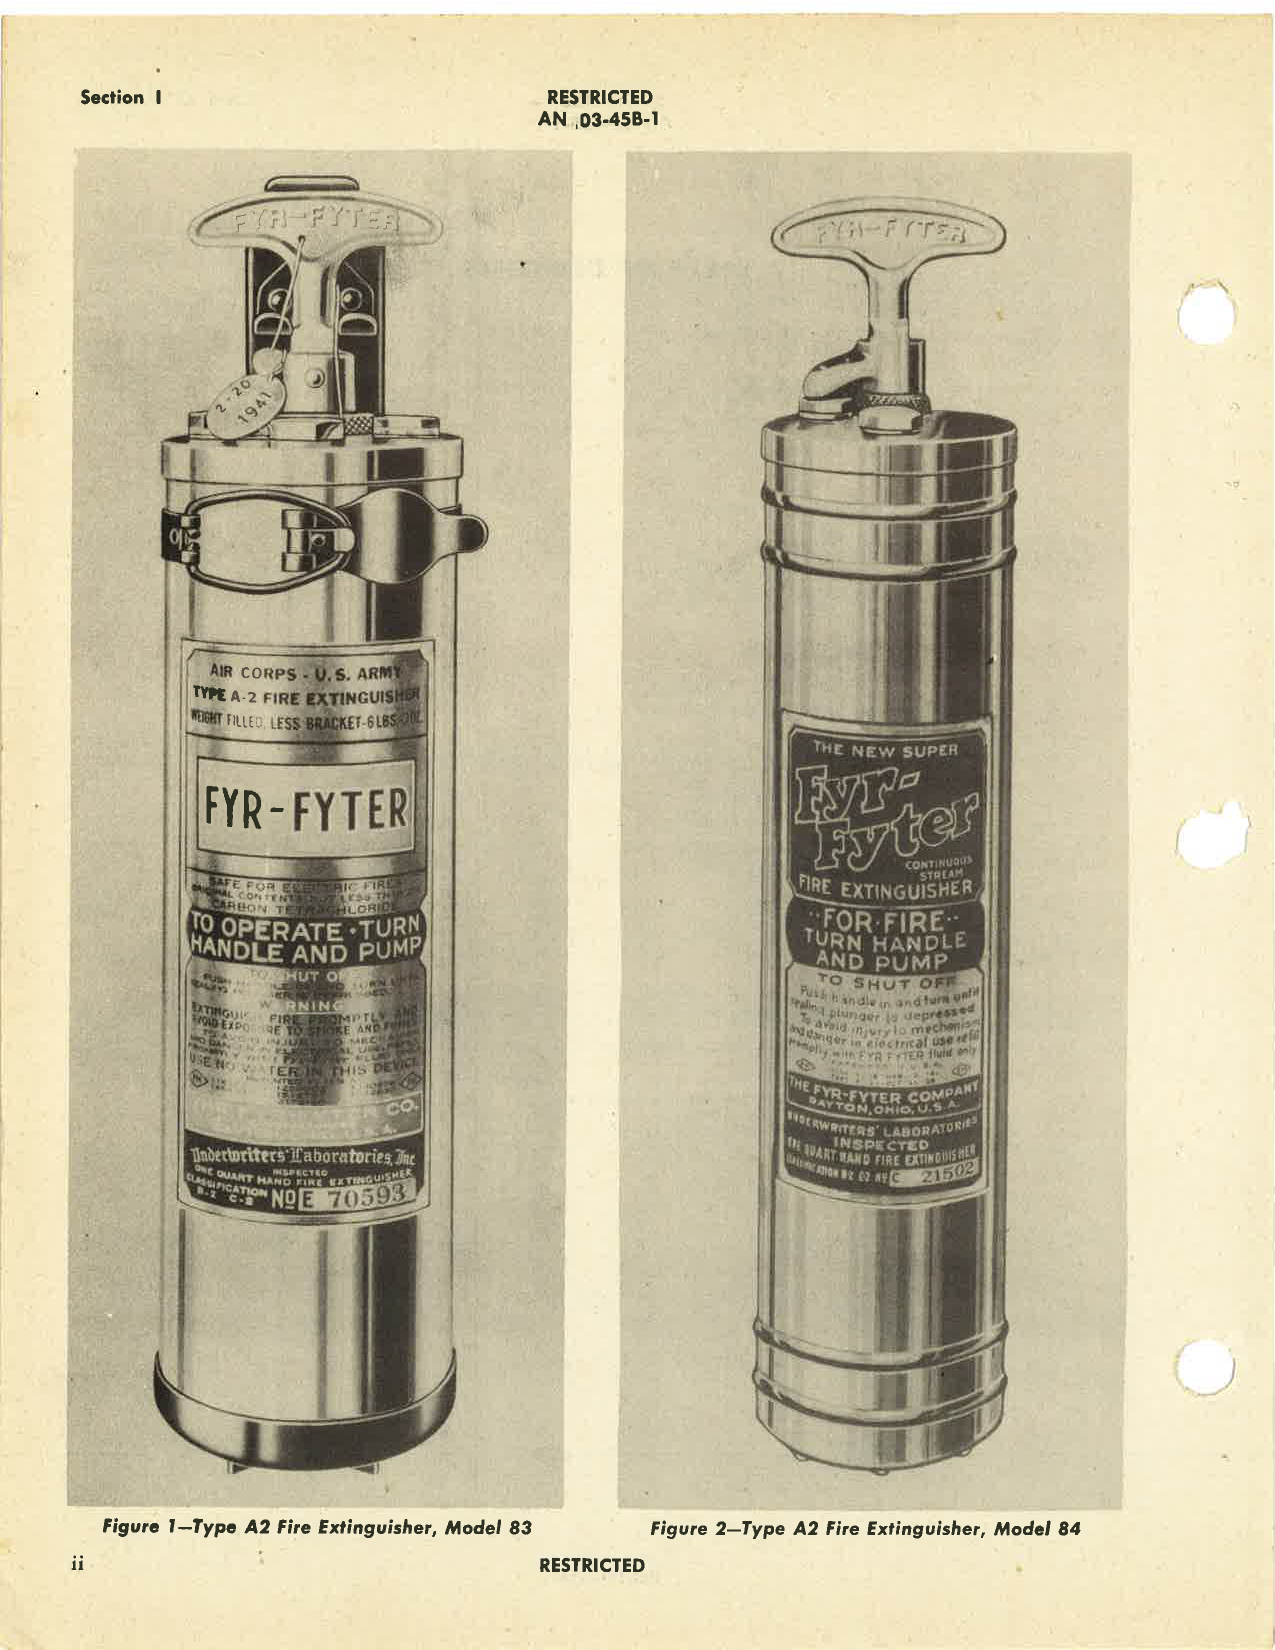 Sample page 4 from AirCorps Library document: Operation, Service, & Overhaul Instructions with Parts Catalog for Fire Extinguisher Type A-2